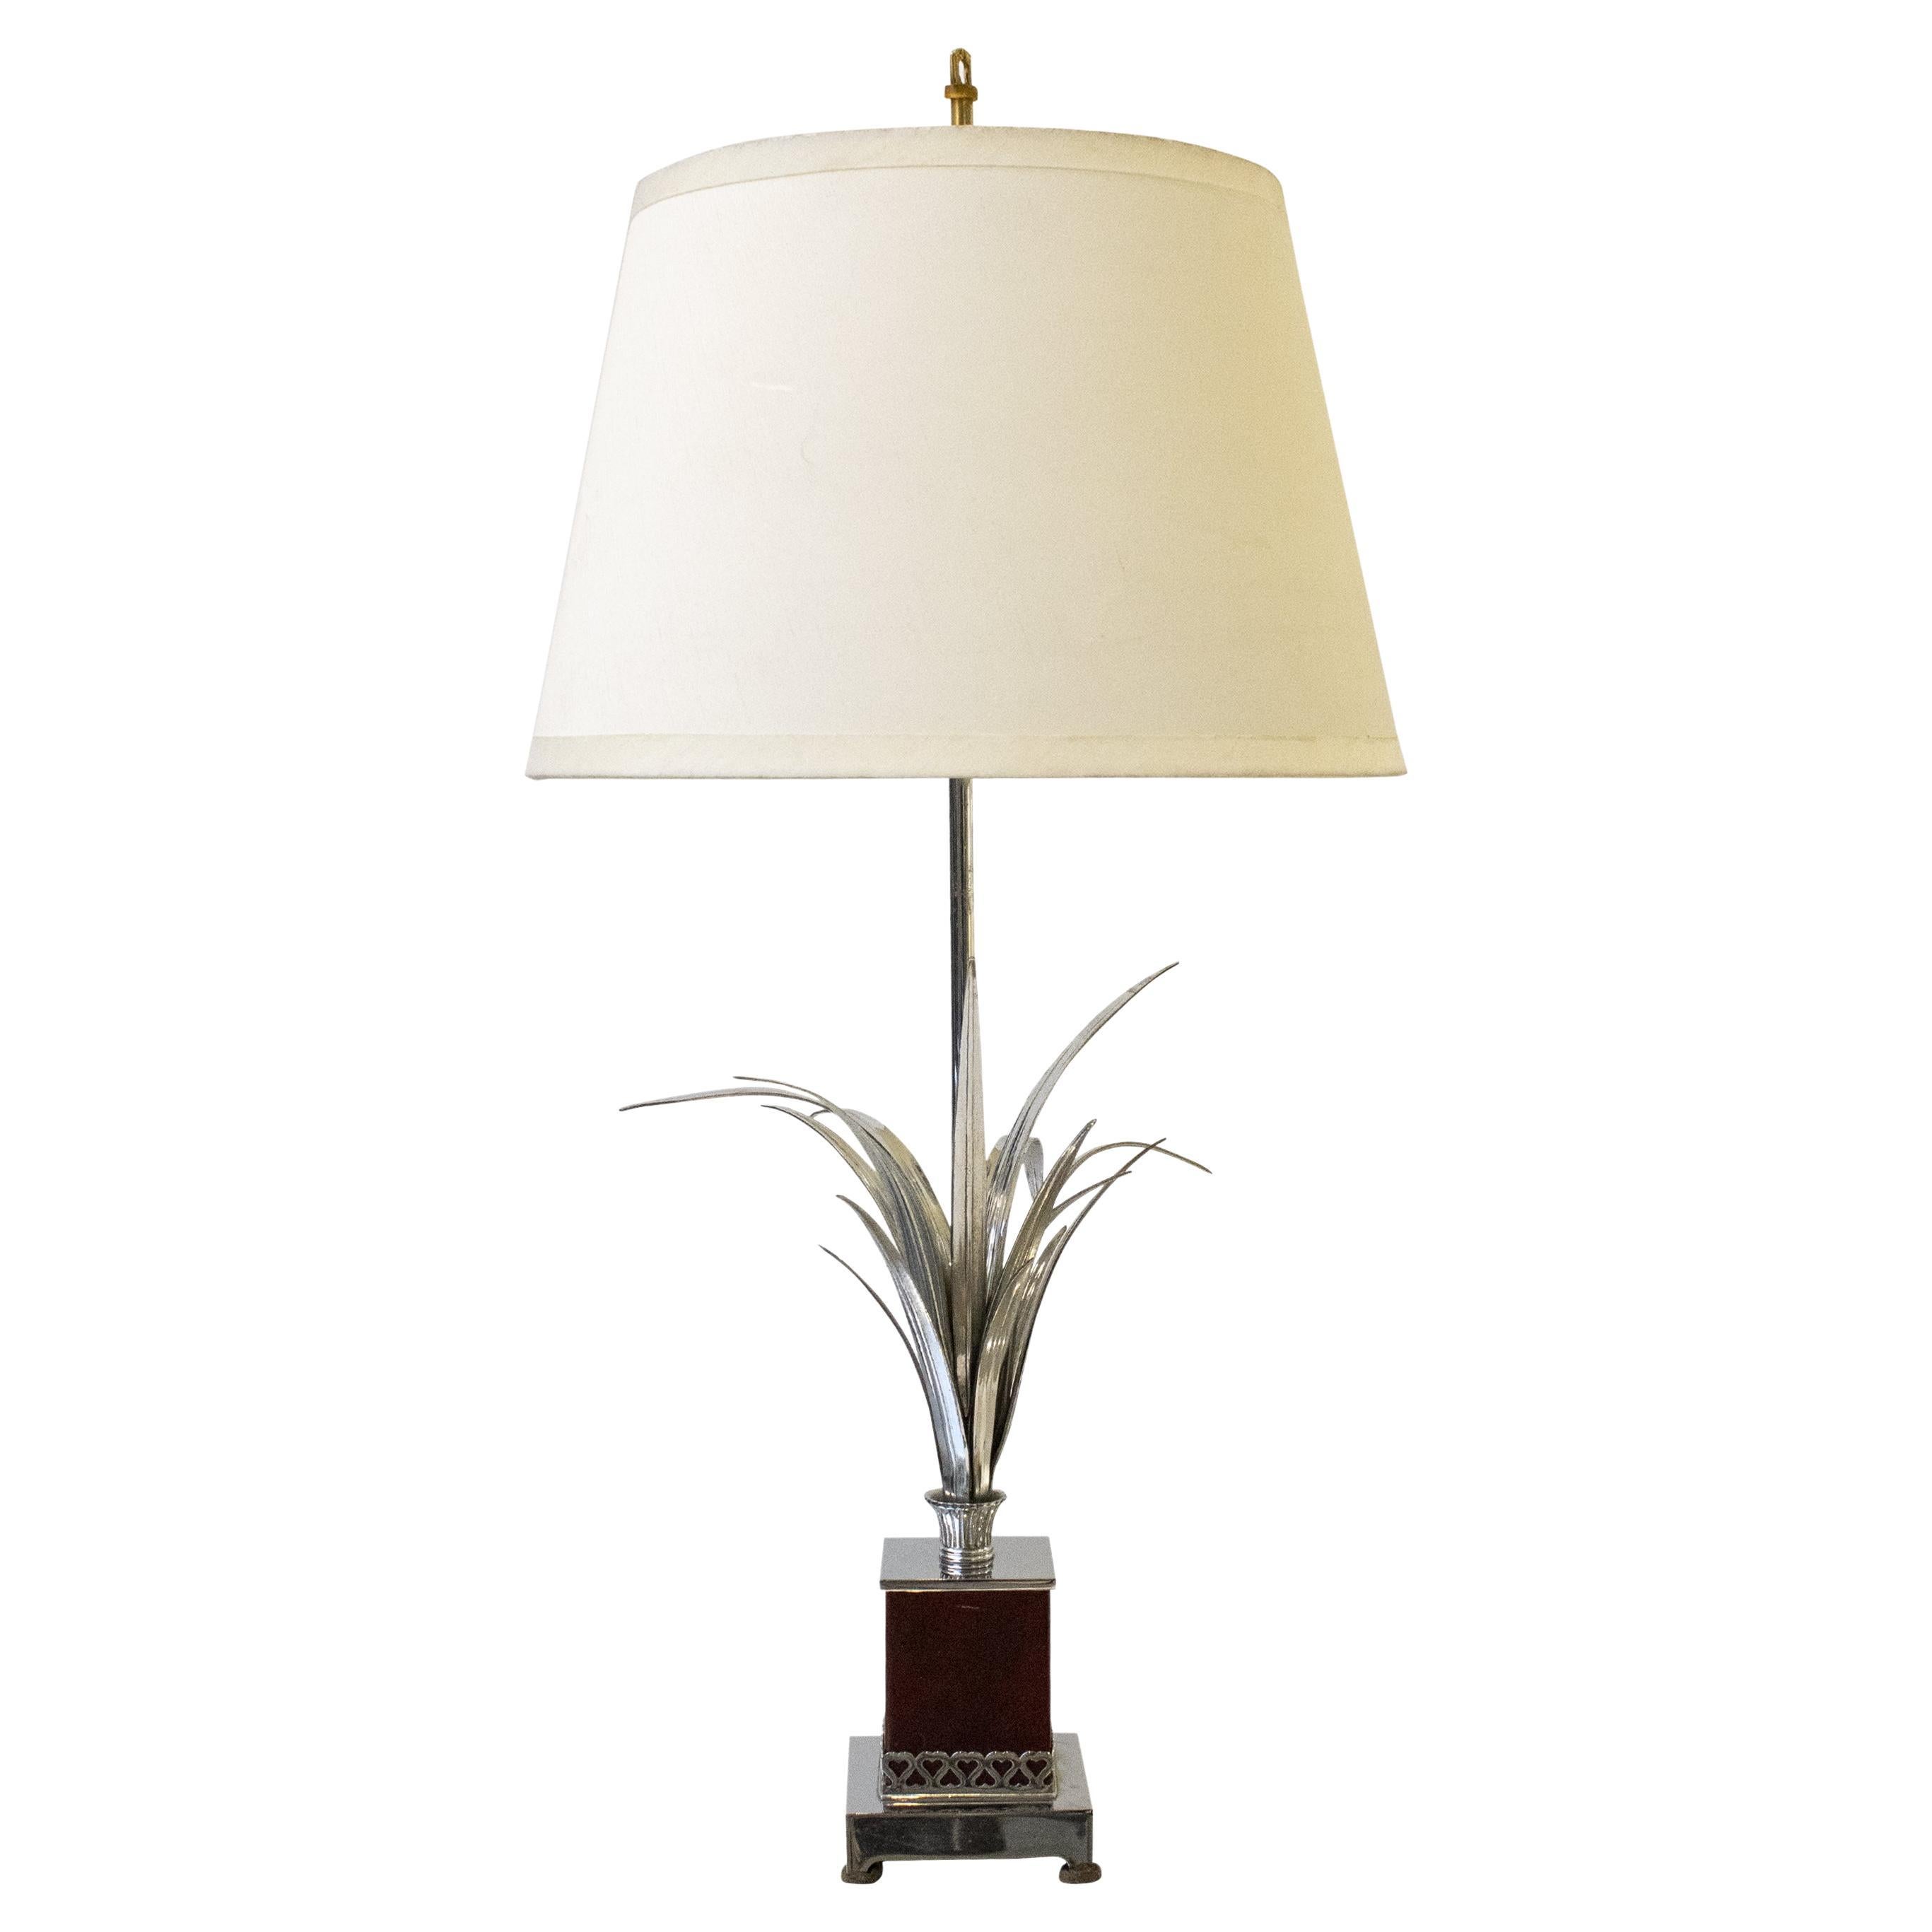 Mid-Century Modern Table Lamp with Organic Leaves Decoration, Italia, 1960 For Sale